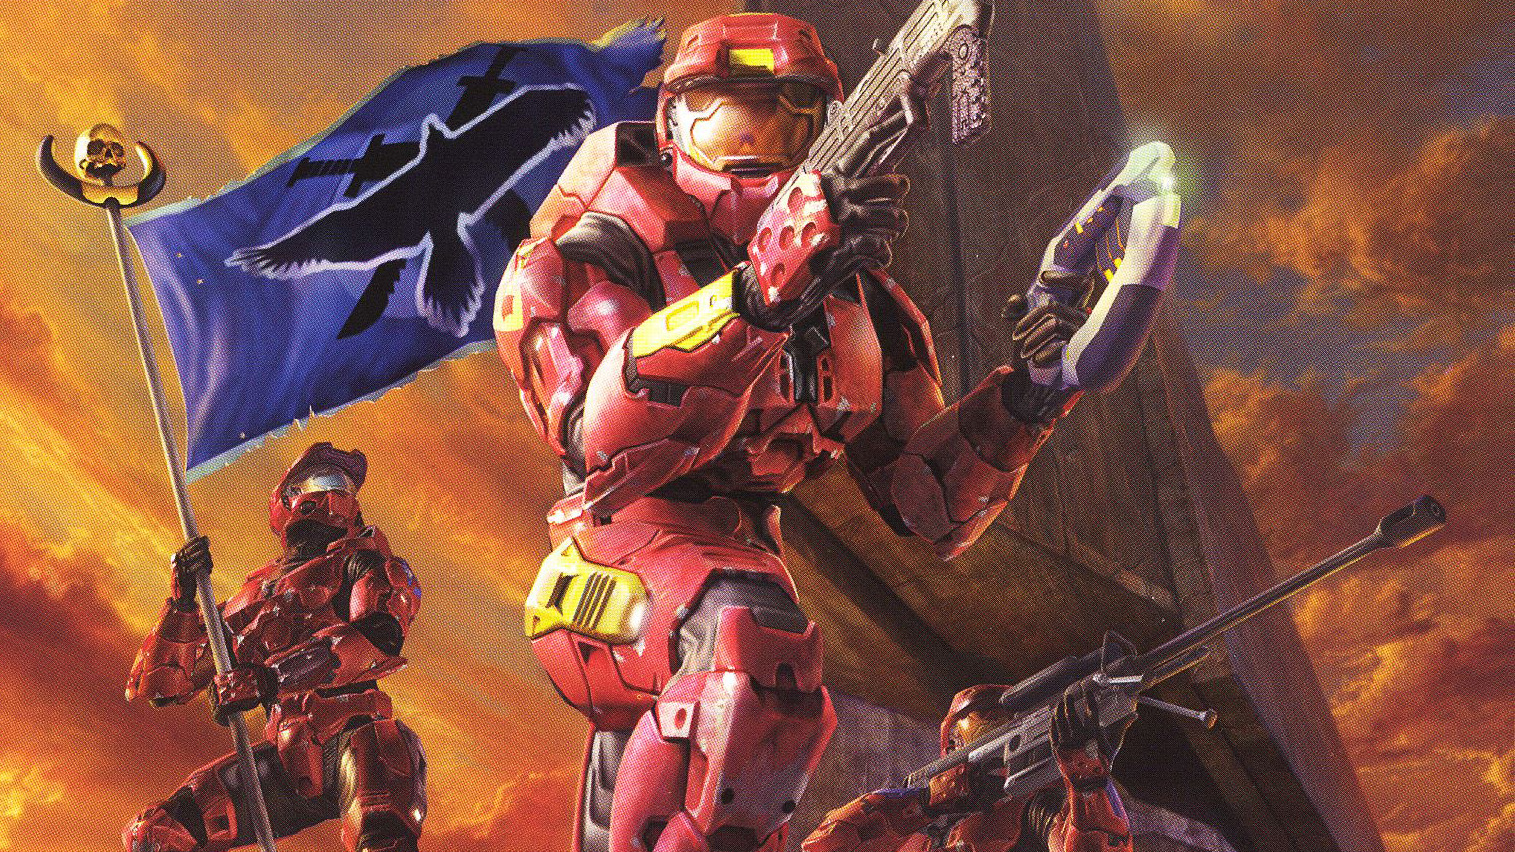 Halo 2 online matchmaking returns in March thanks to community modders [Video]